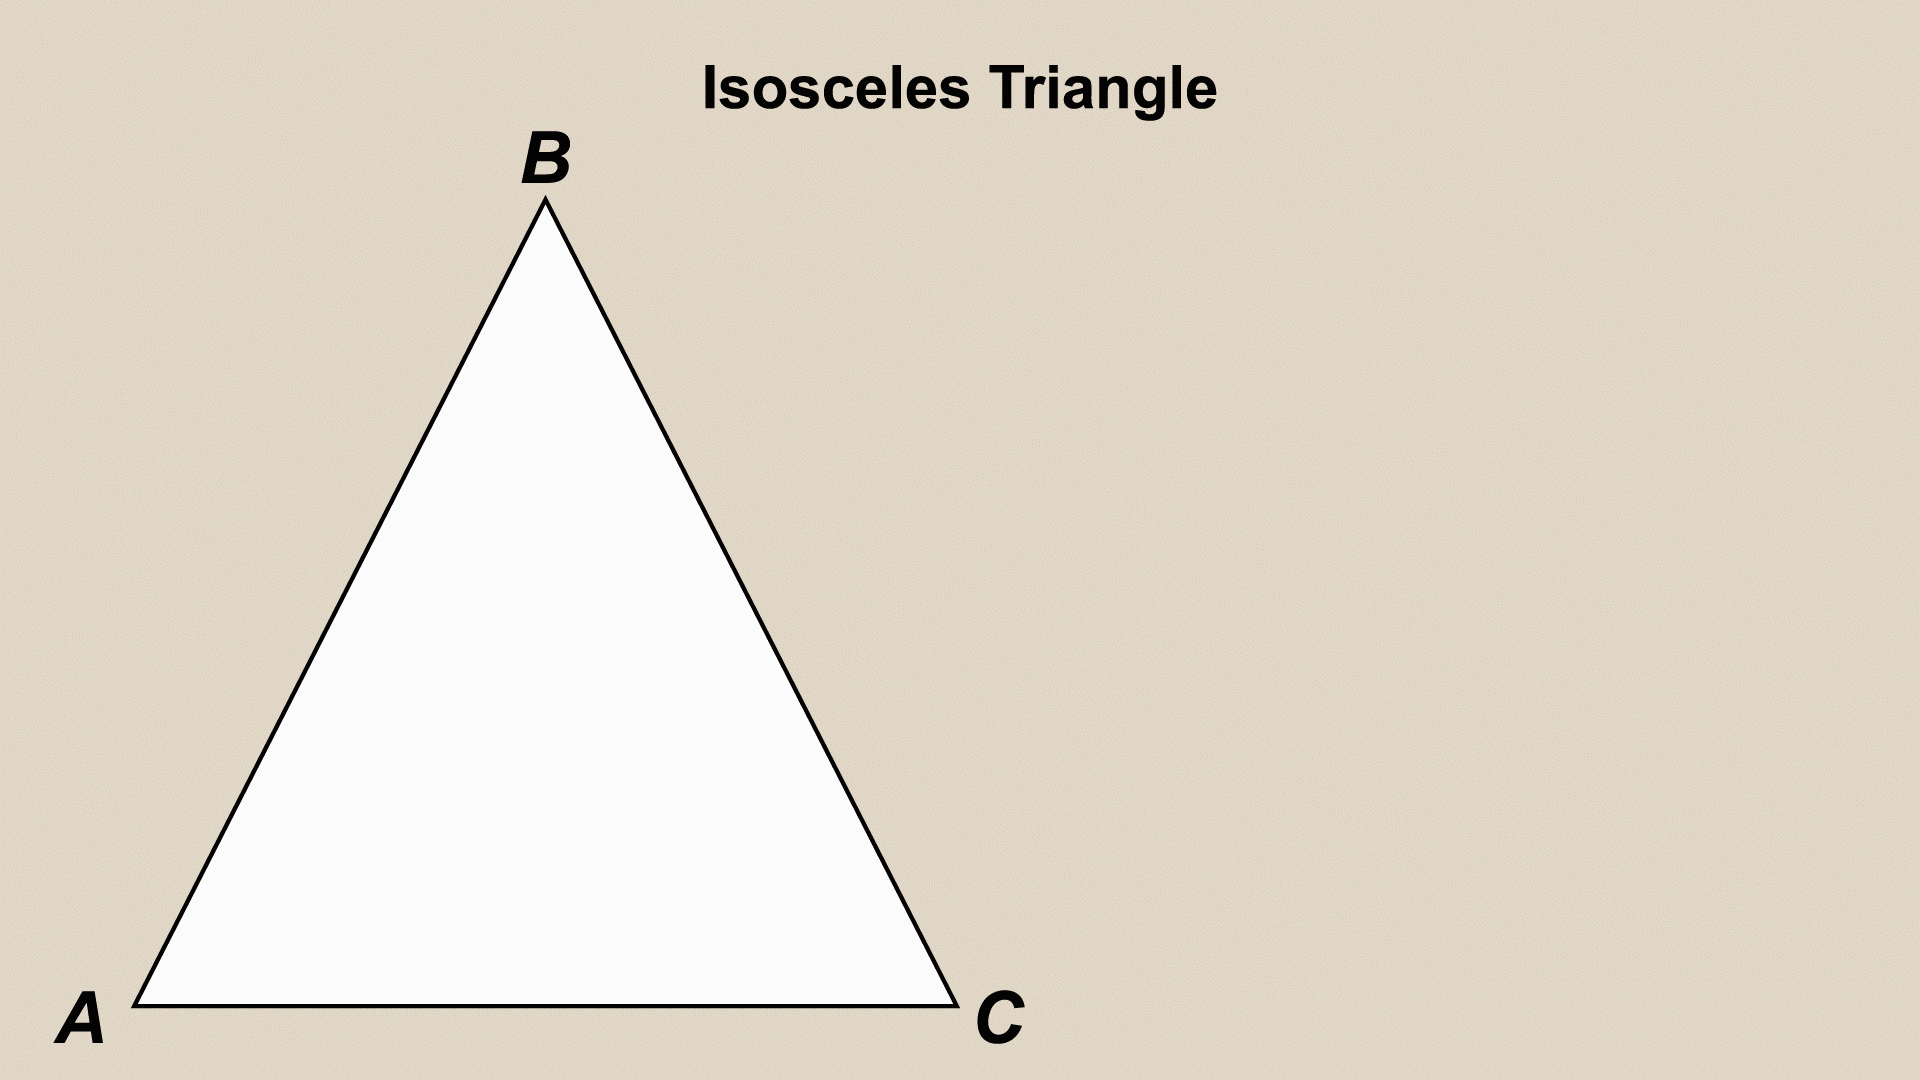 This piece of animated math clip art shows the properties of an isosceles triangle.